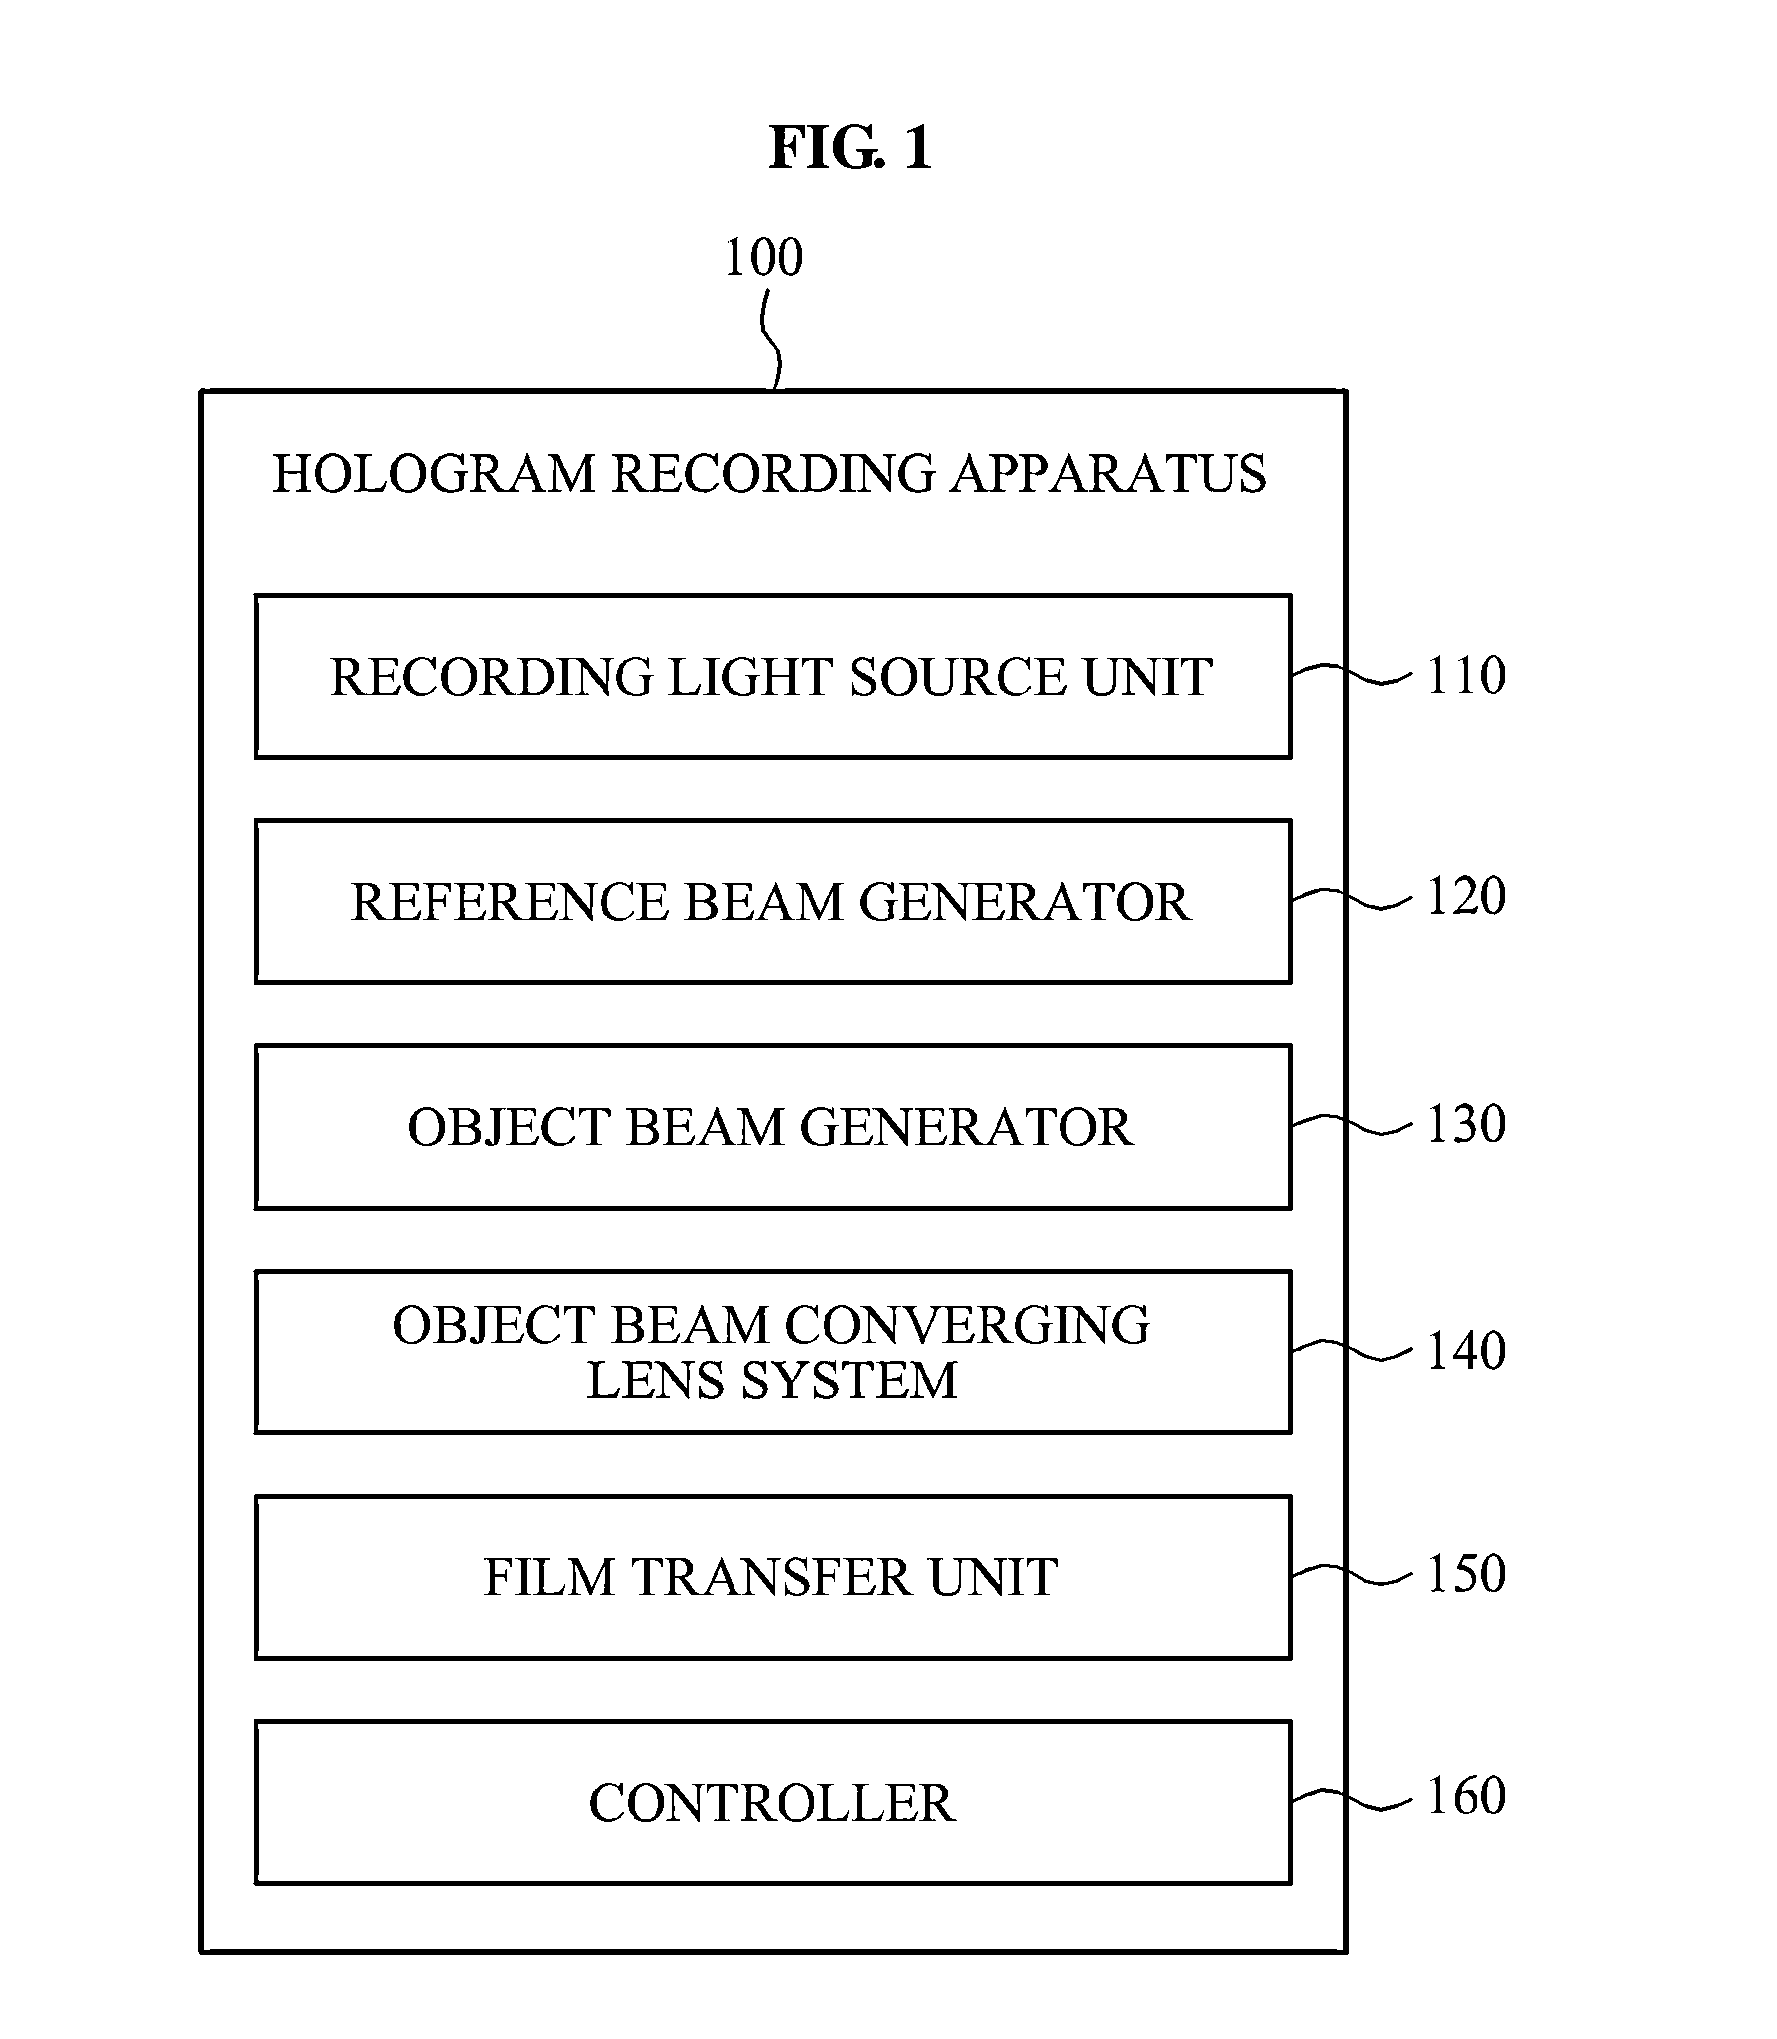 Hologram recording apparatus and method for recording holographic element images using spatial light modulator (SLM)